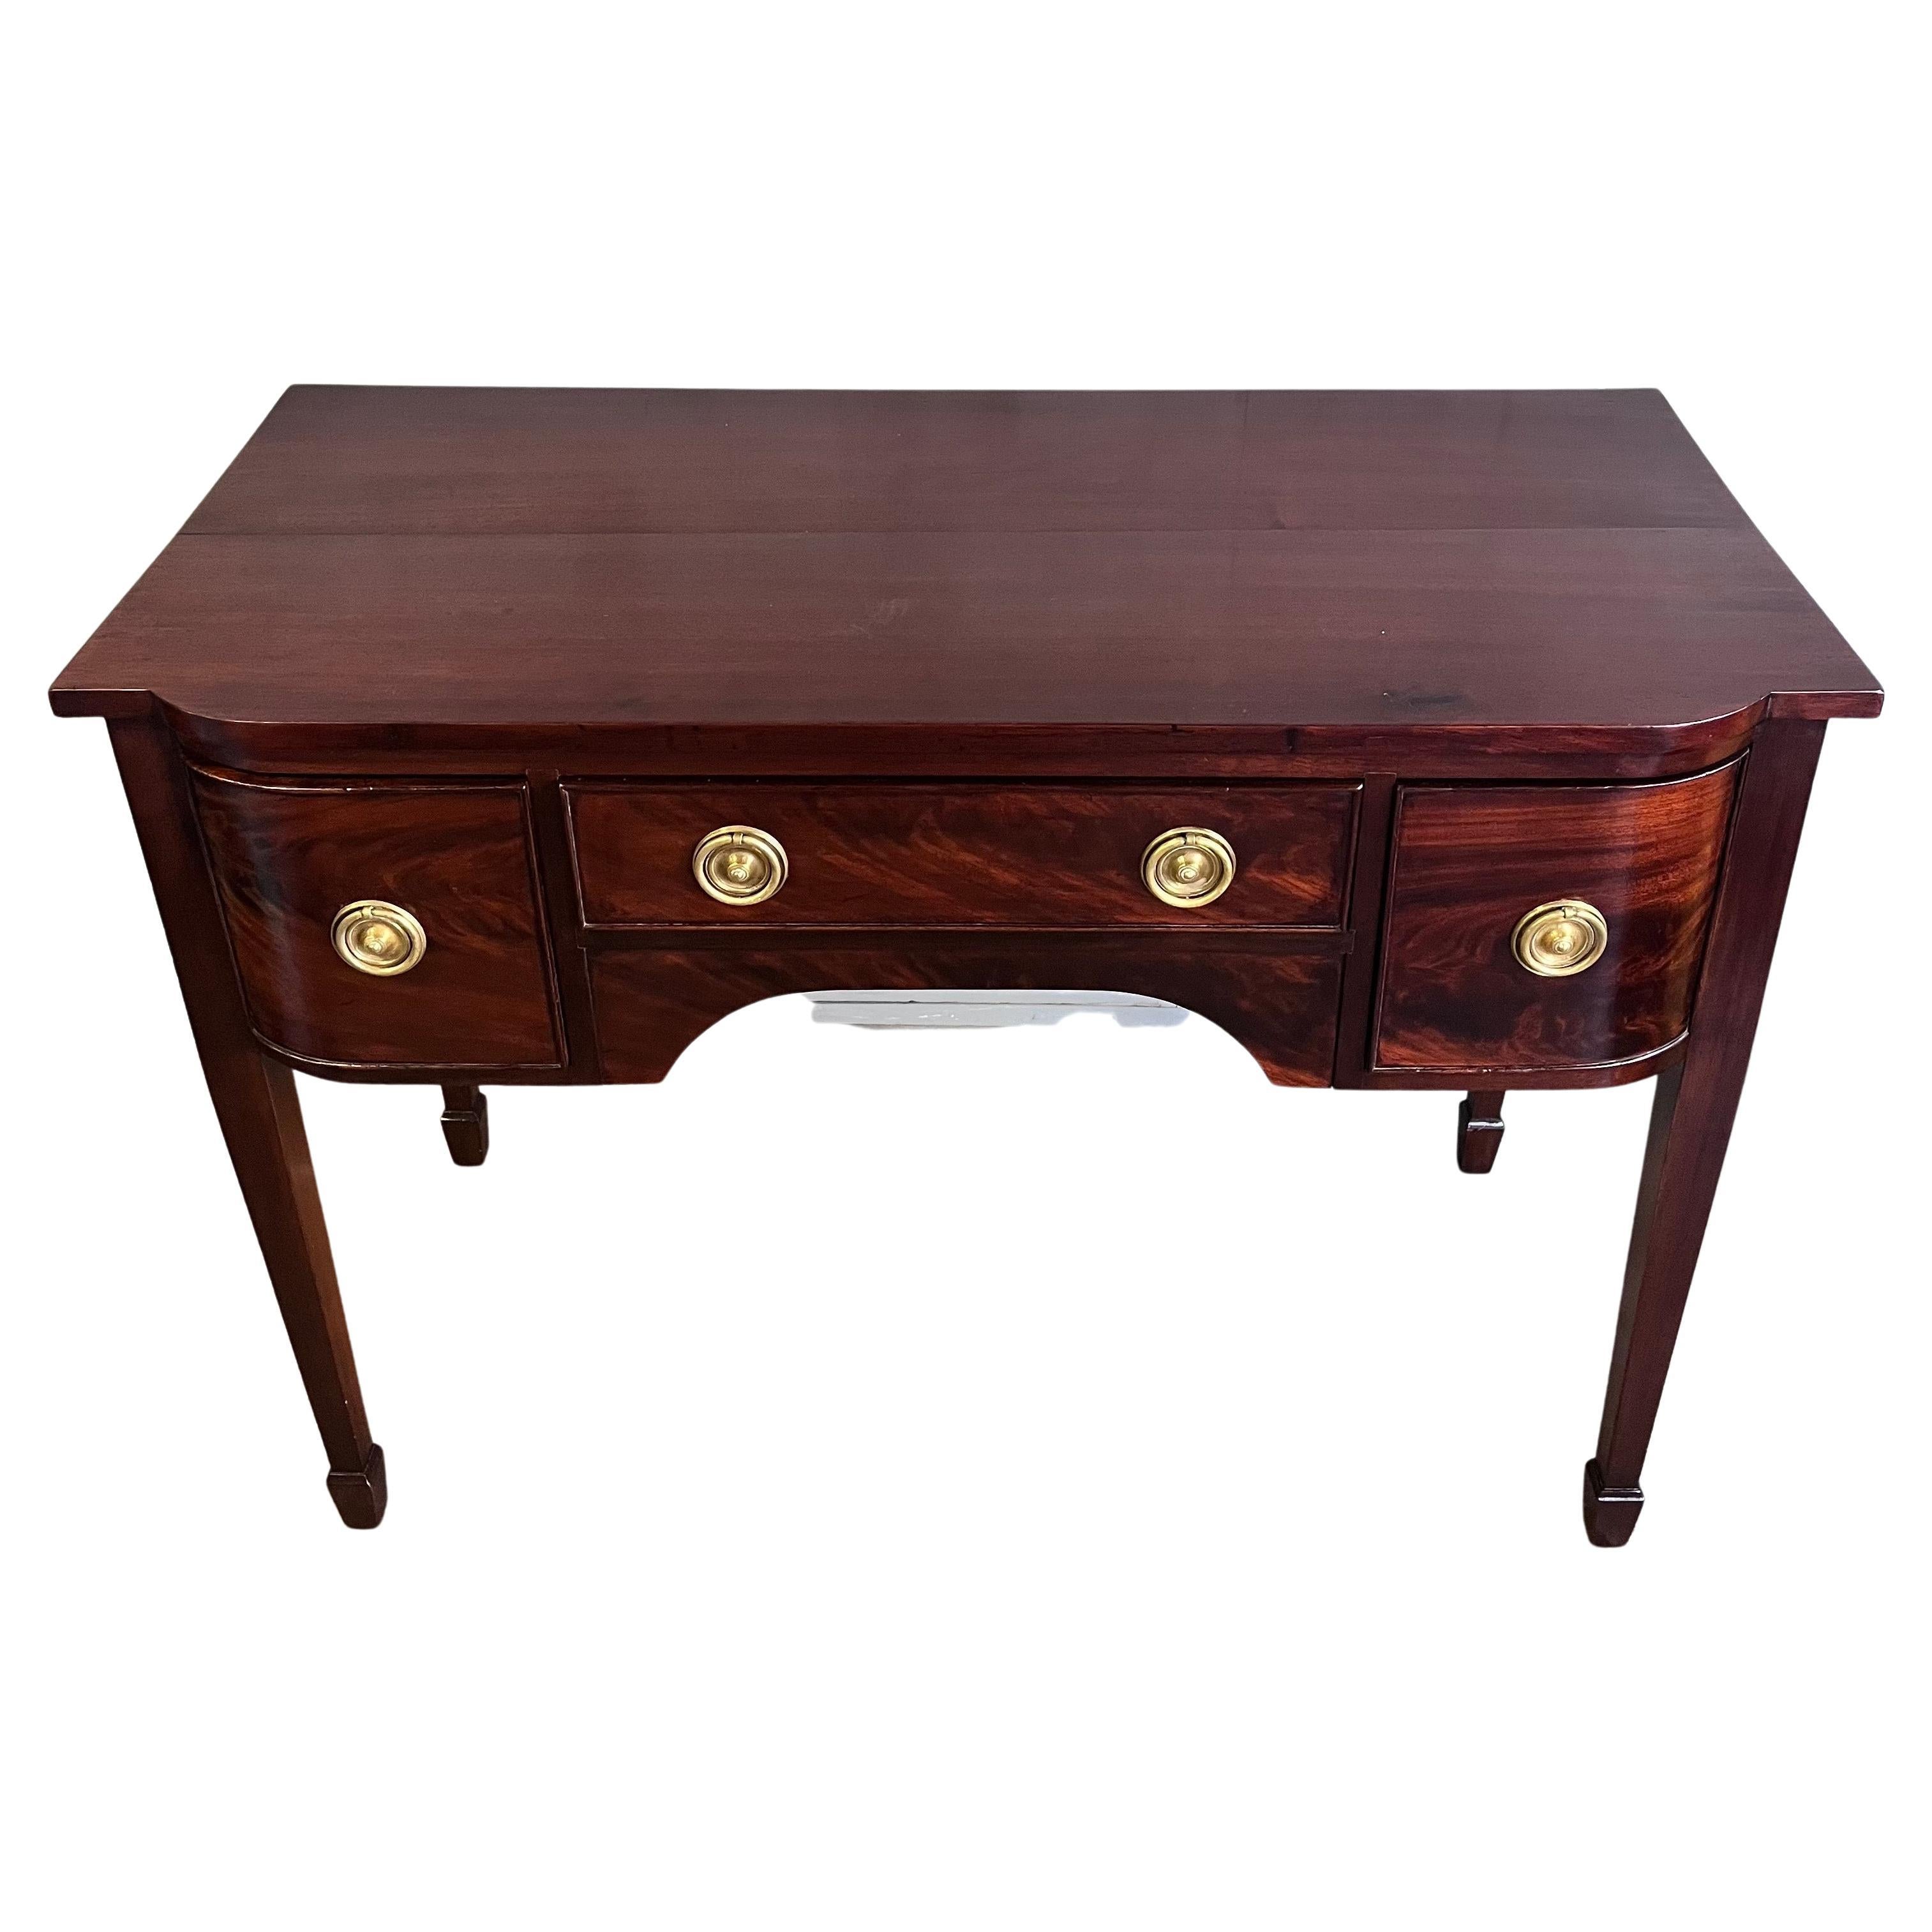 Georgian Hondurian mahogany bow front sideboard and server. Beautiful dark brown color with an old surface. Strong brass ring pull hardware. Tall Hepplewhite legs terminating on spade feet. Good medium scale with balance and proportion. A middle